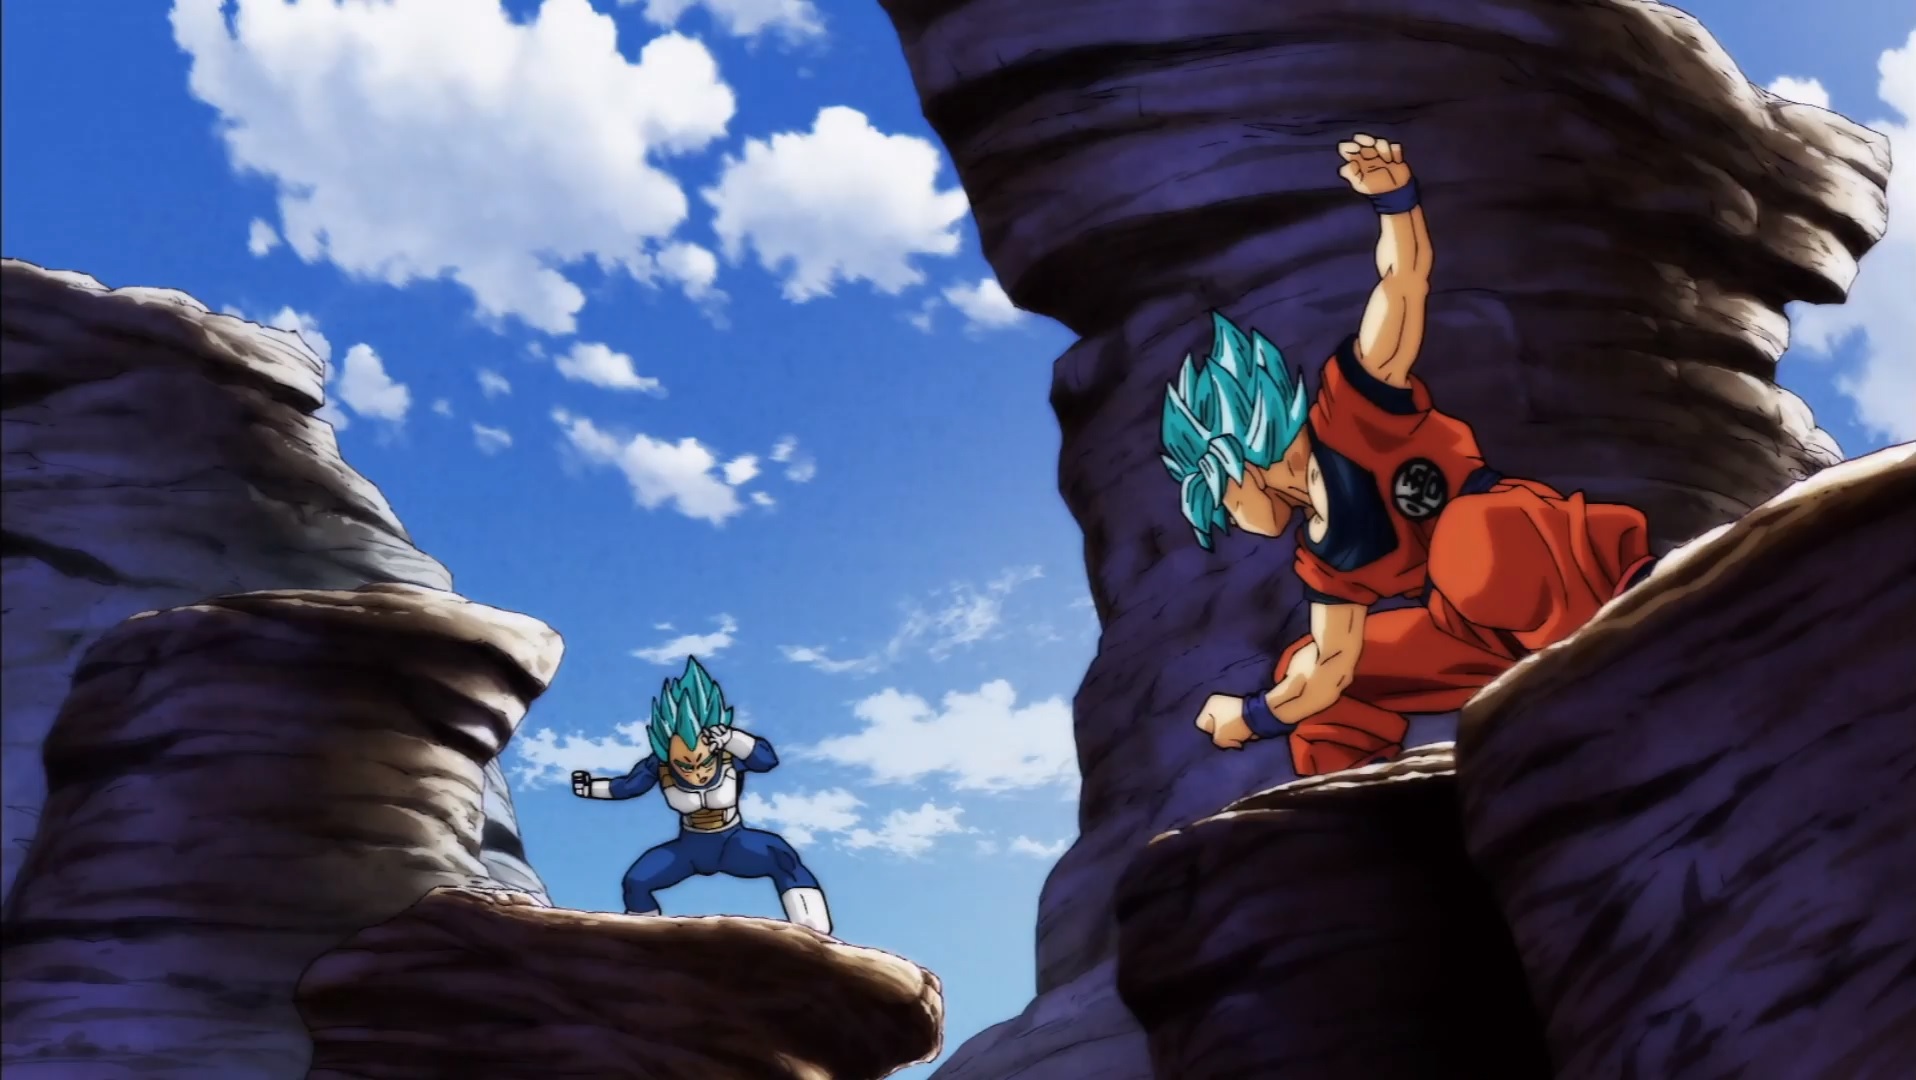 Goku and Vegeta join forces with their ultimate power in Dragon Ball  Super's latest episode - Meristation